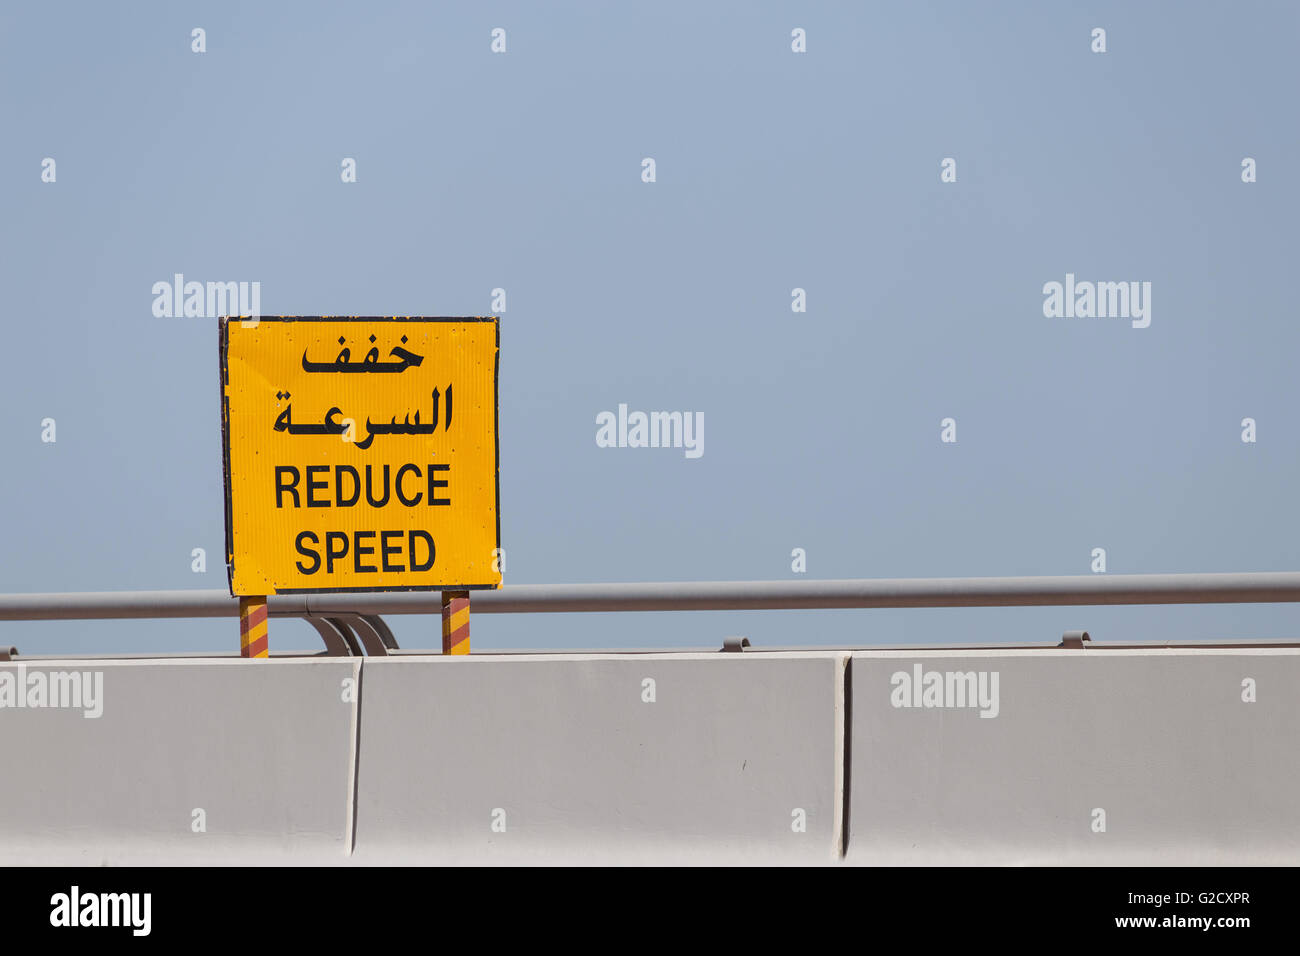 road sign Reduce Speed in English and Arabic Stock Photo